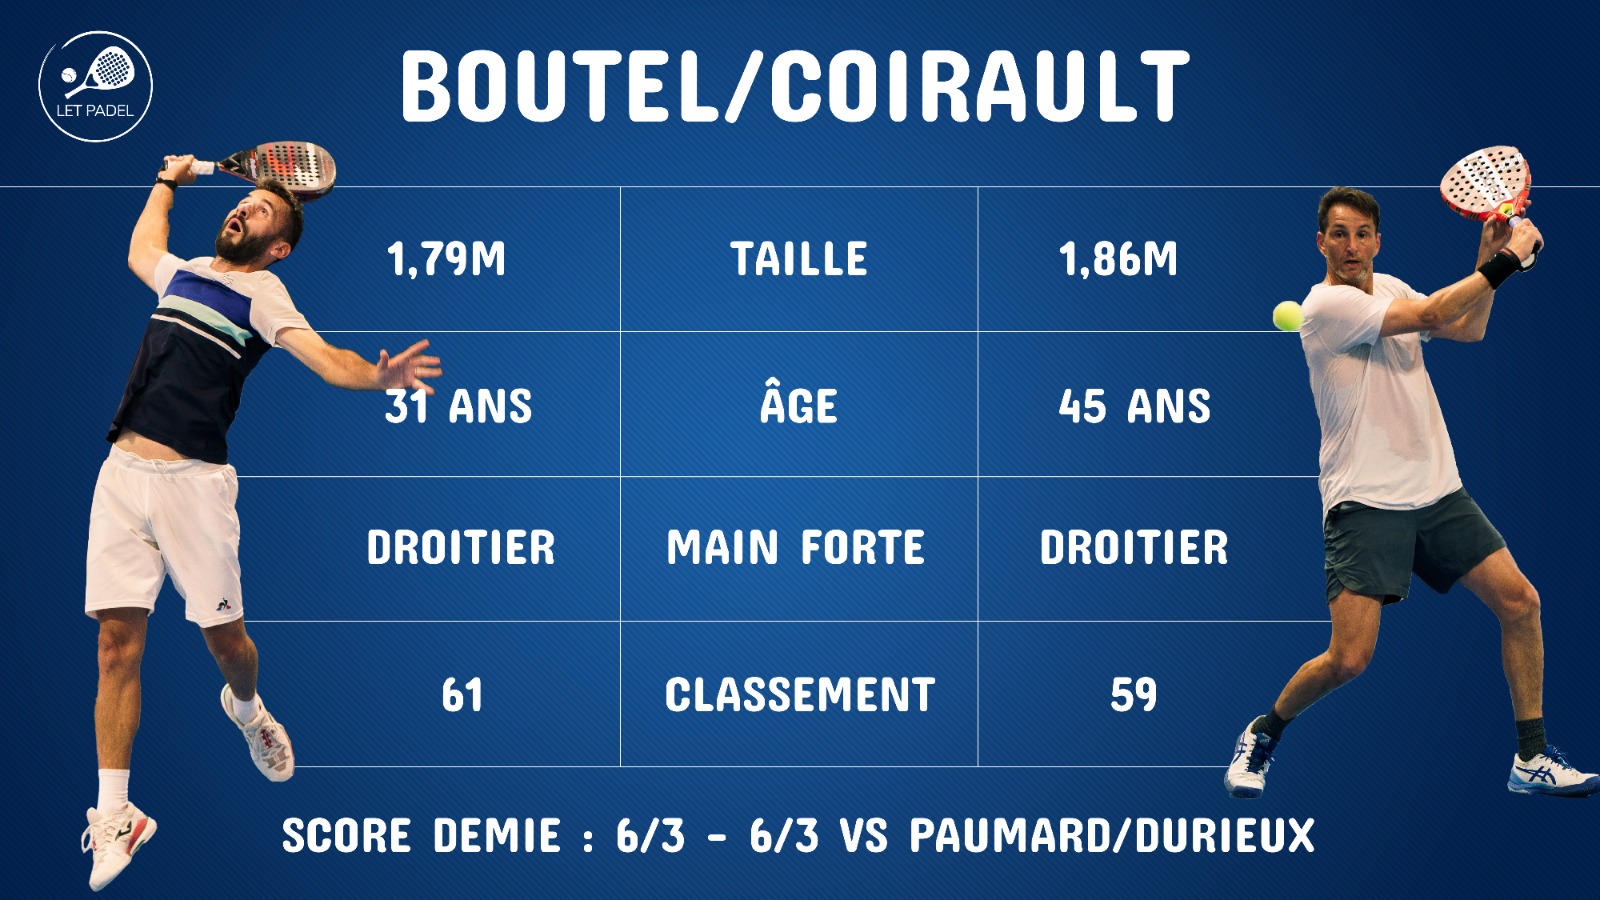 Boutel Coirault